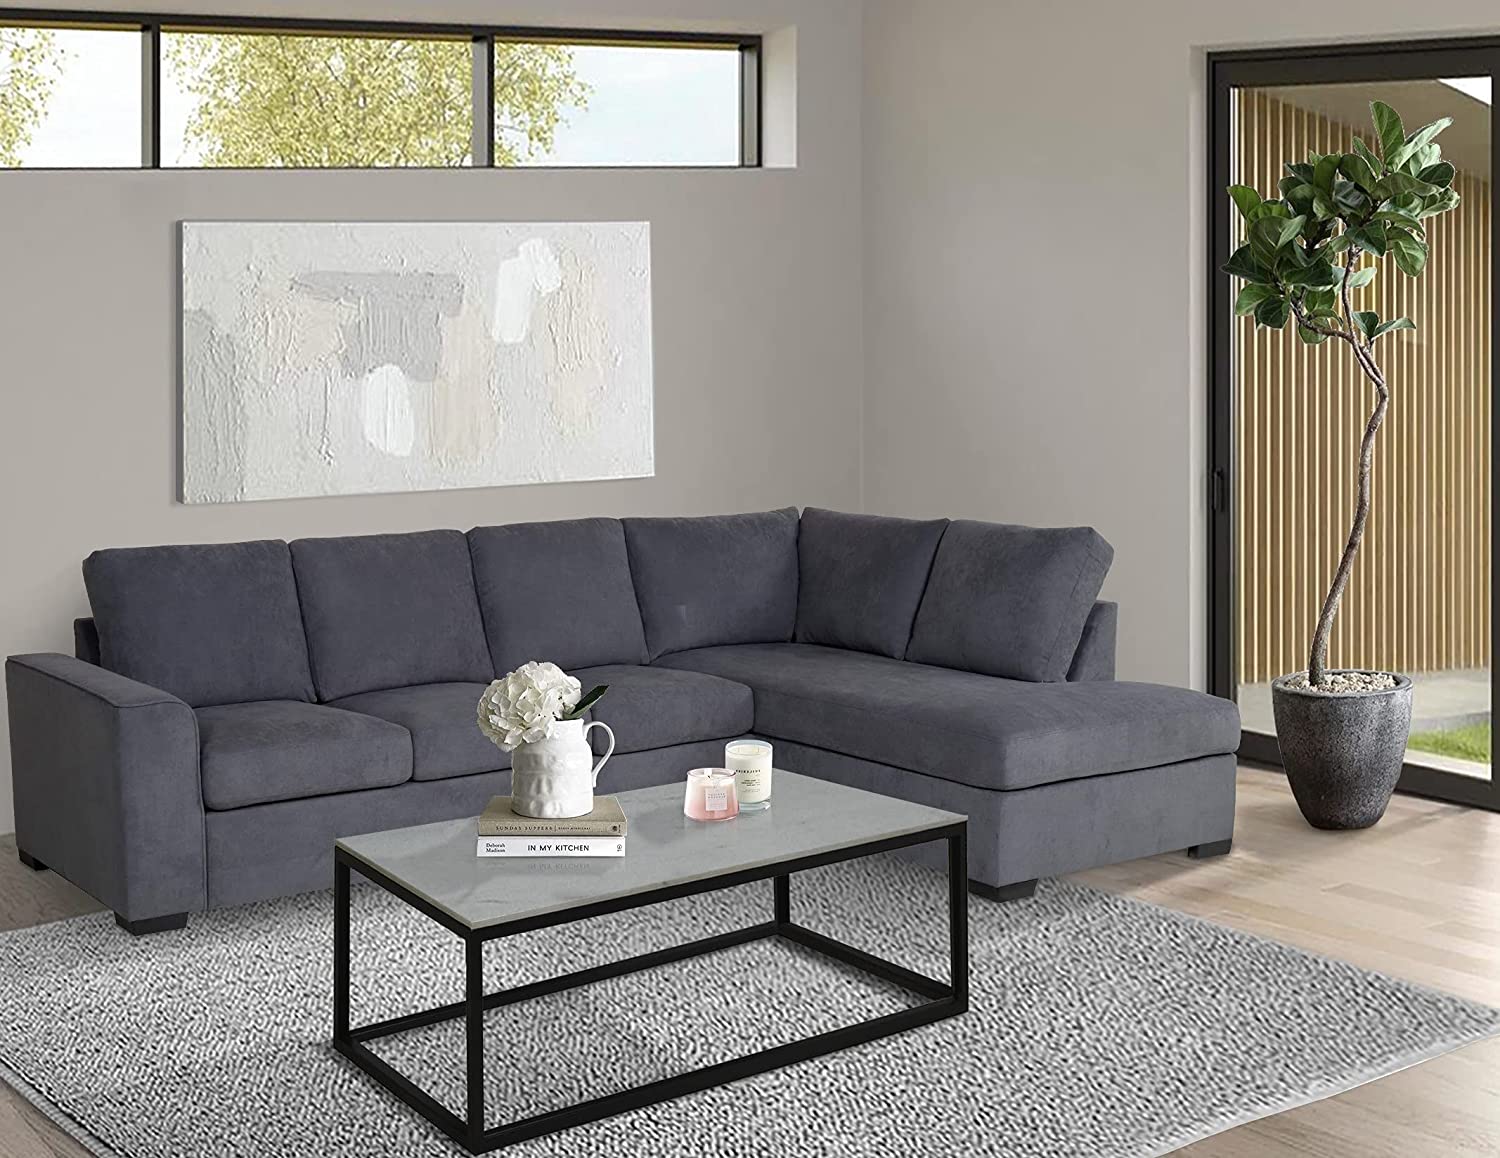 Christo Corner L Shaped 3-Seat Sofa with RHF Chaise Lounge Couch Uphol